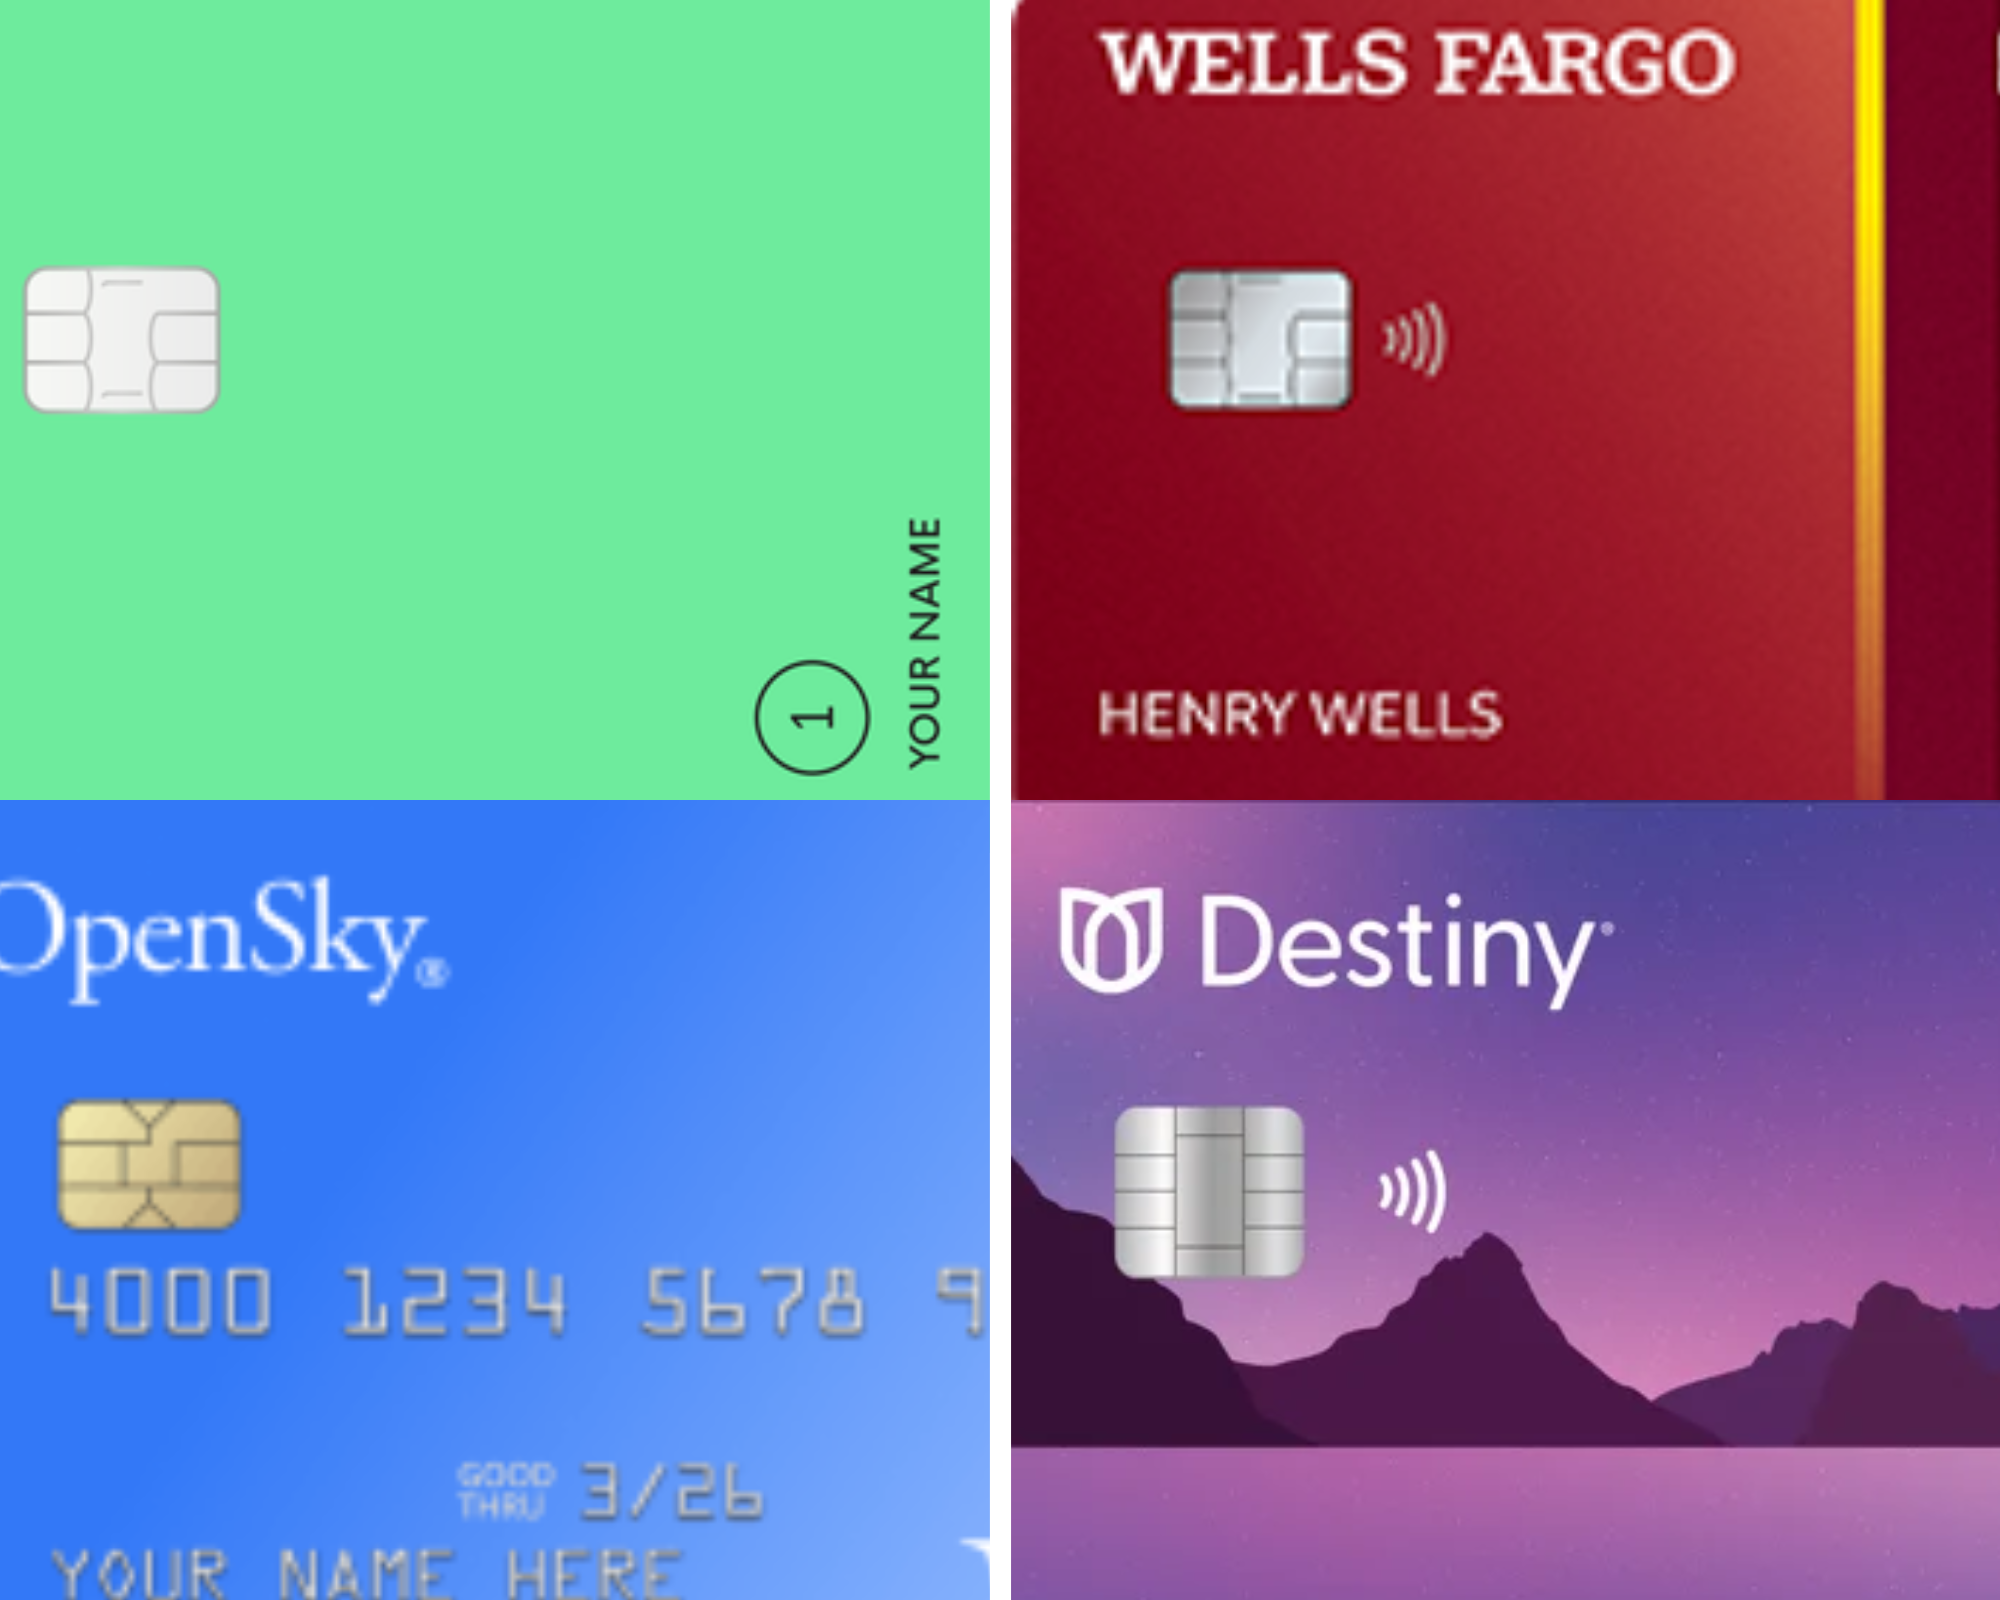 We found some options for you: Destiny Mastercard, OpenSky Secured, Petal 1 Visa or Wells Fargo Reflect® Card